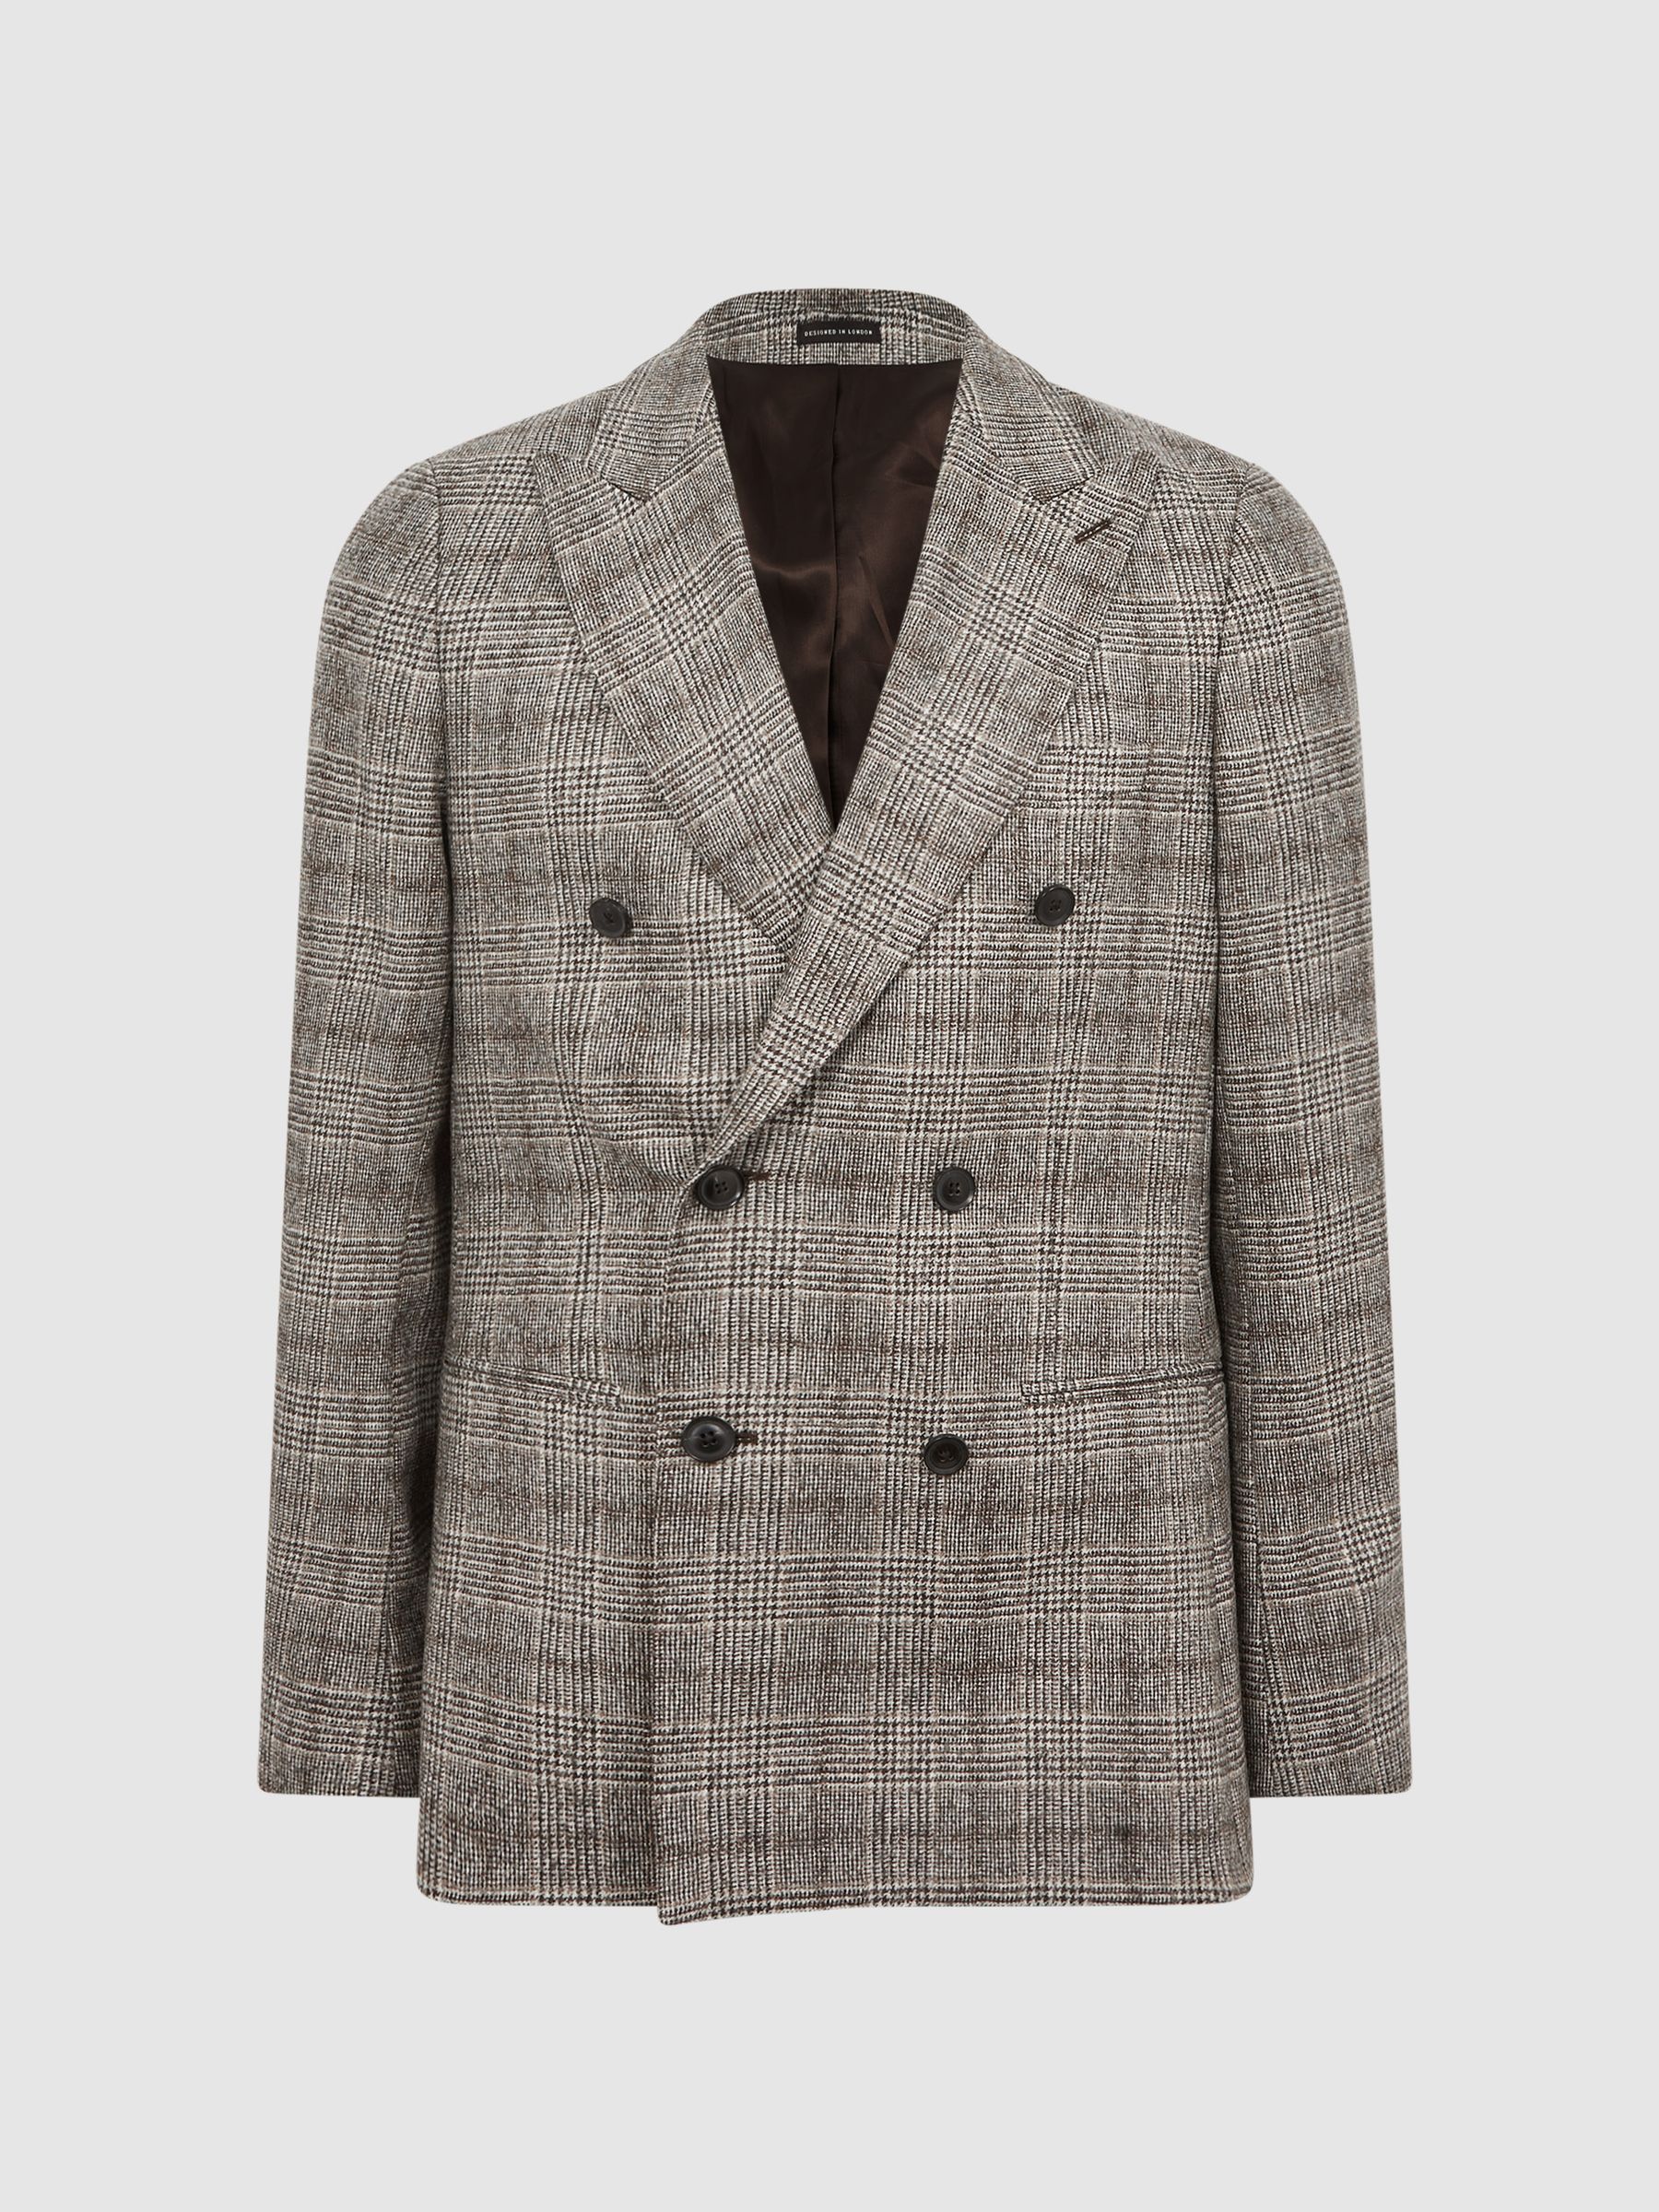 Reiss Alfredo Slim Fit Double Breasted Prince Of Wales Check Blazer - REISS